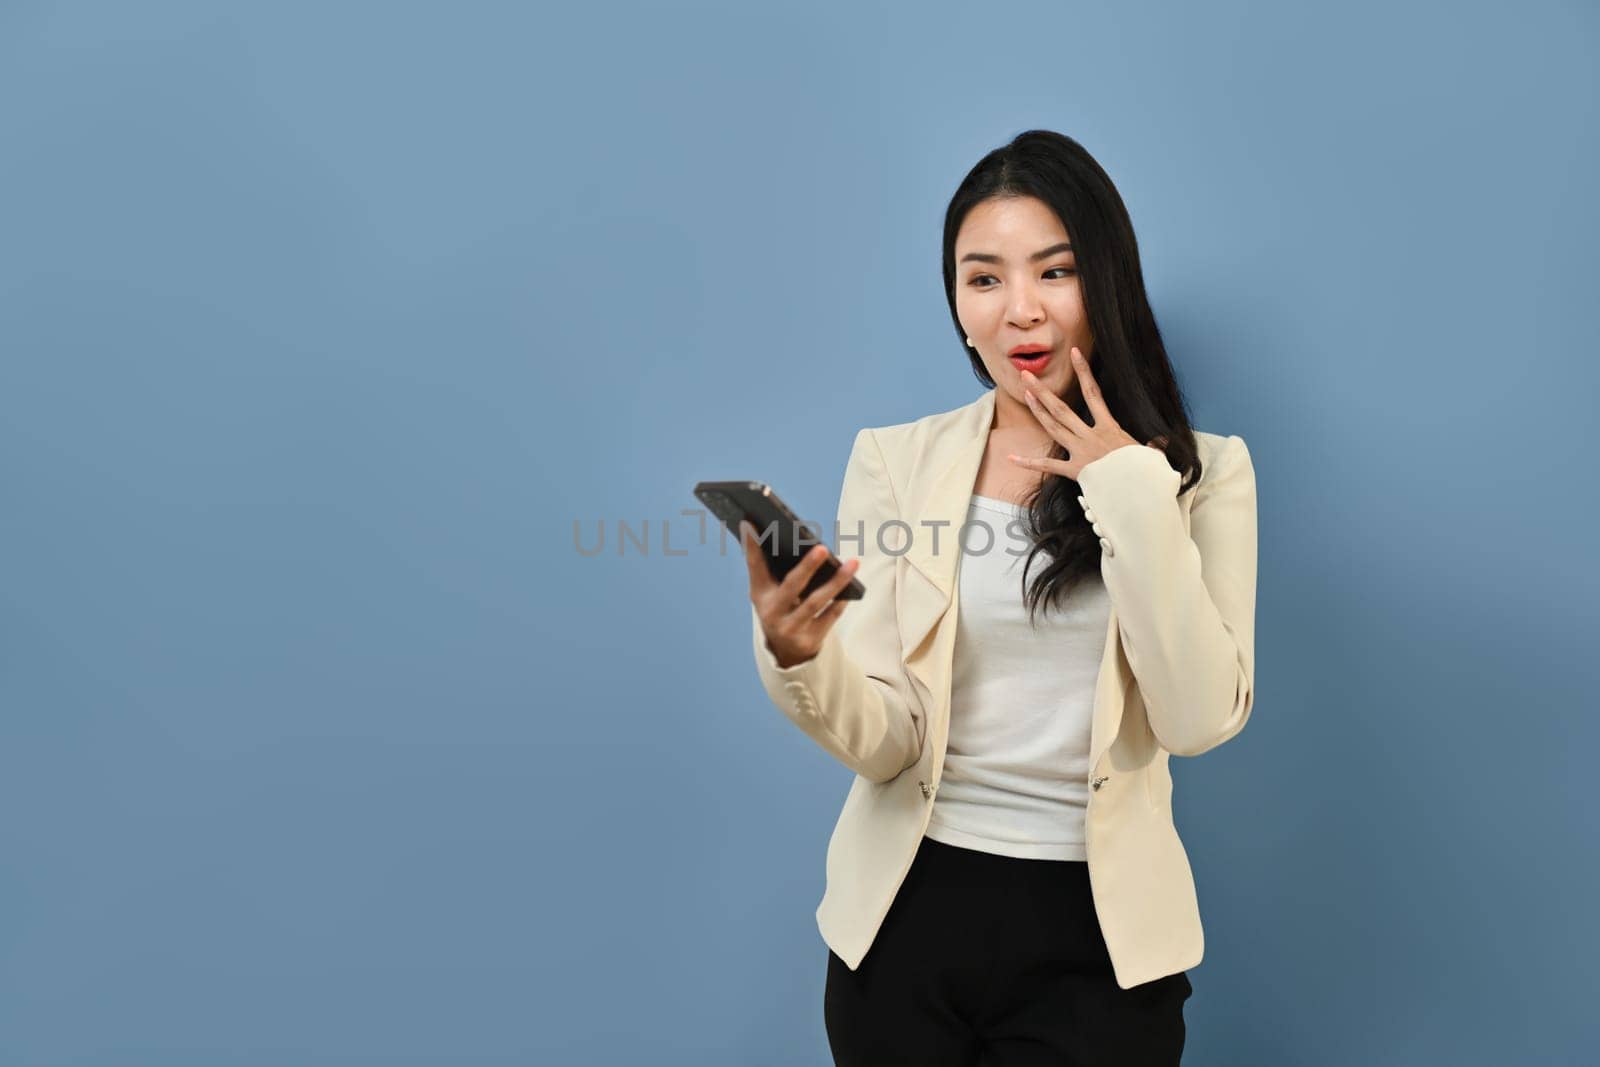 Surprised young Asian woman in stylish suit holding smart phone in hands, standing on blue background by prathanchorruangsak